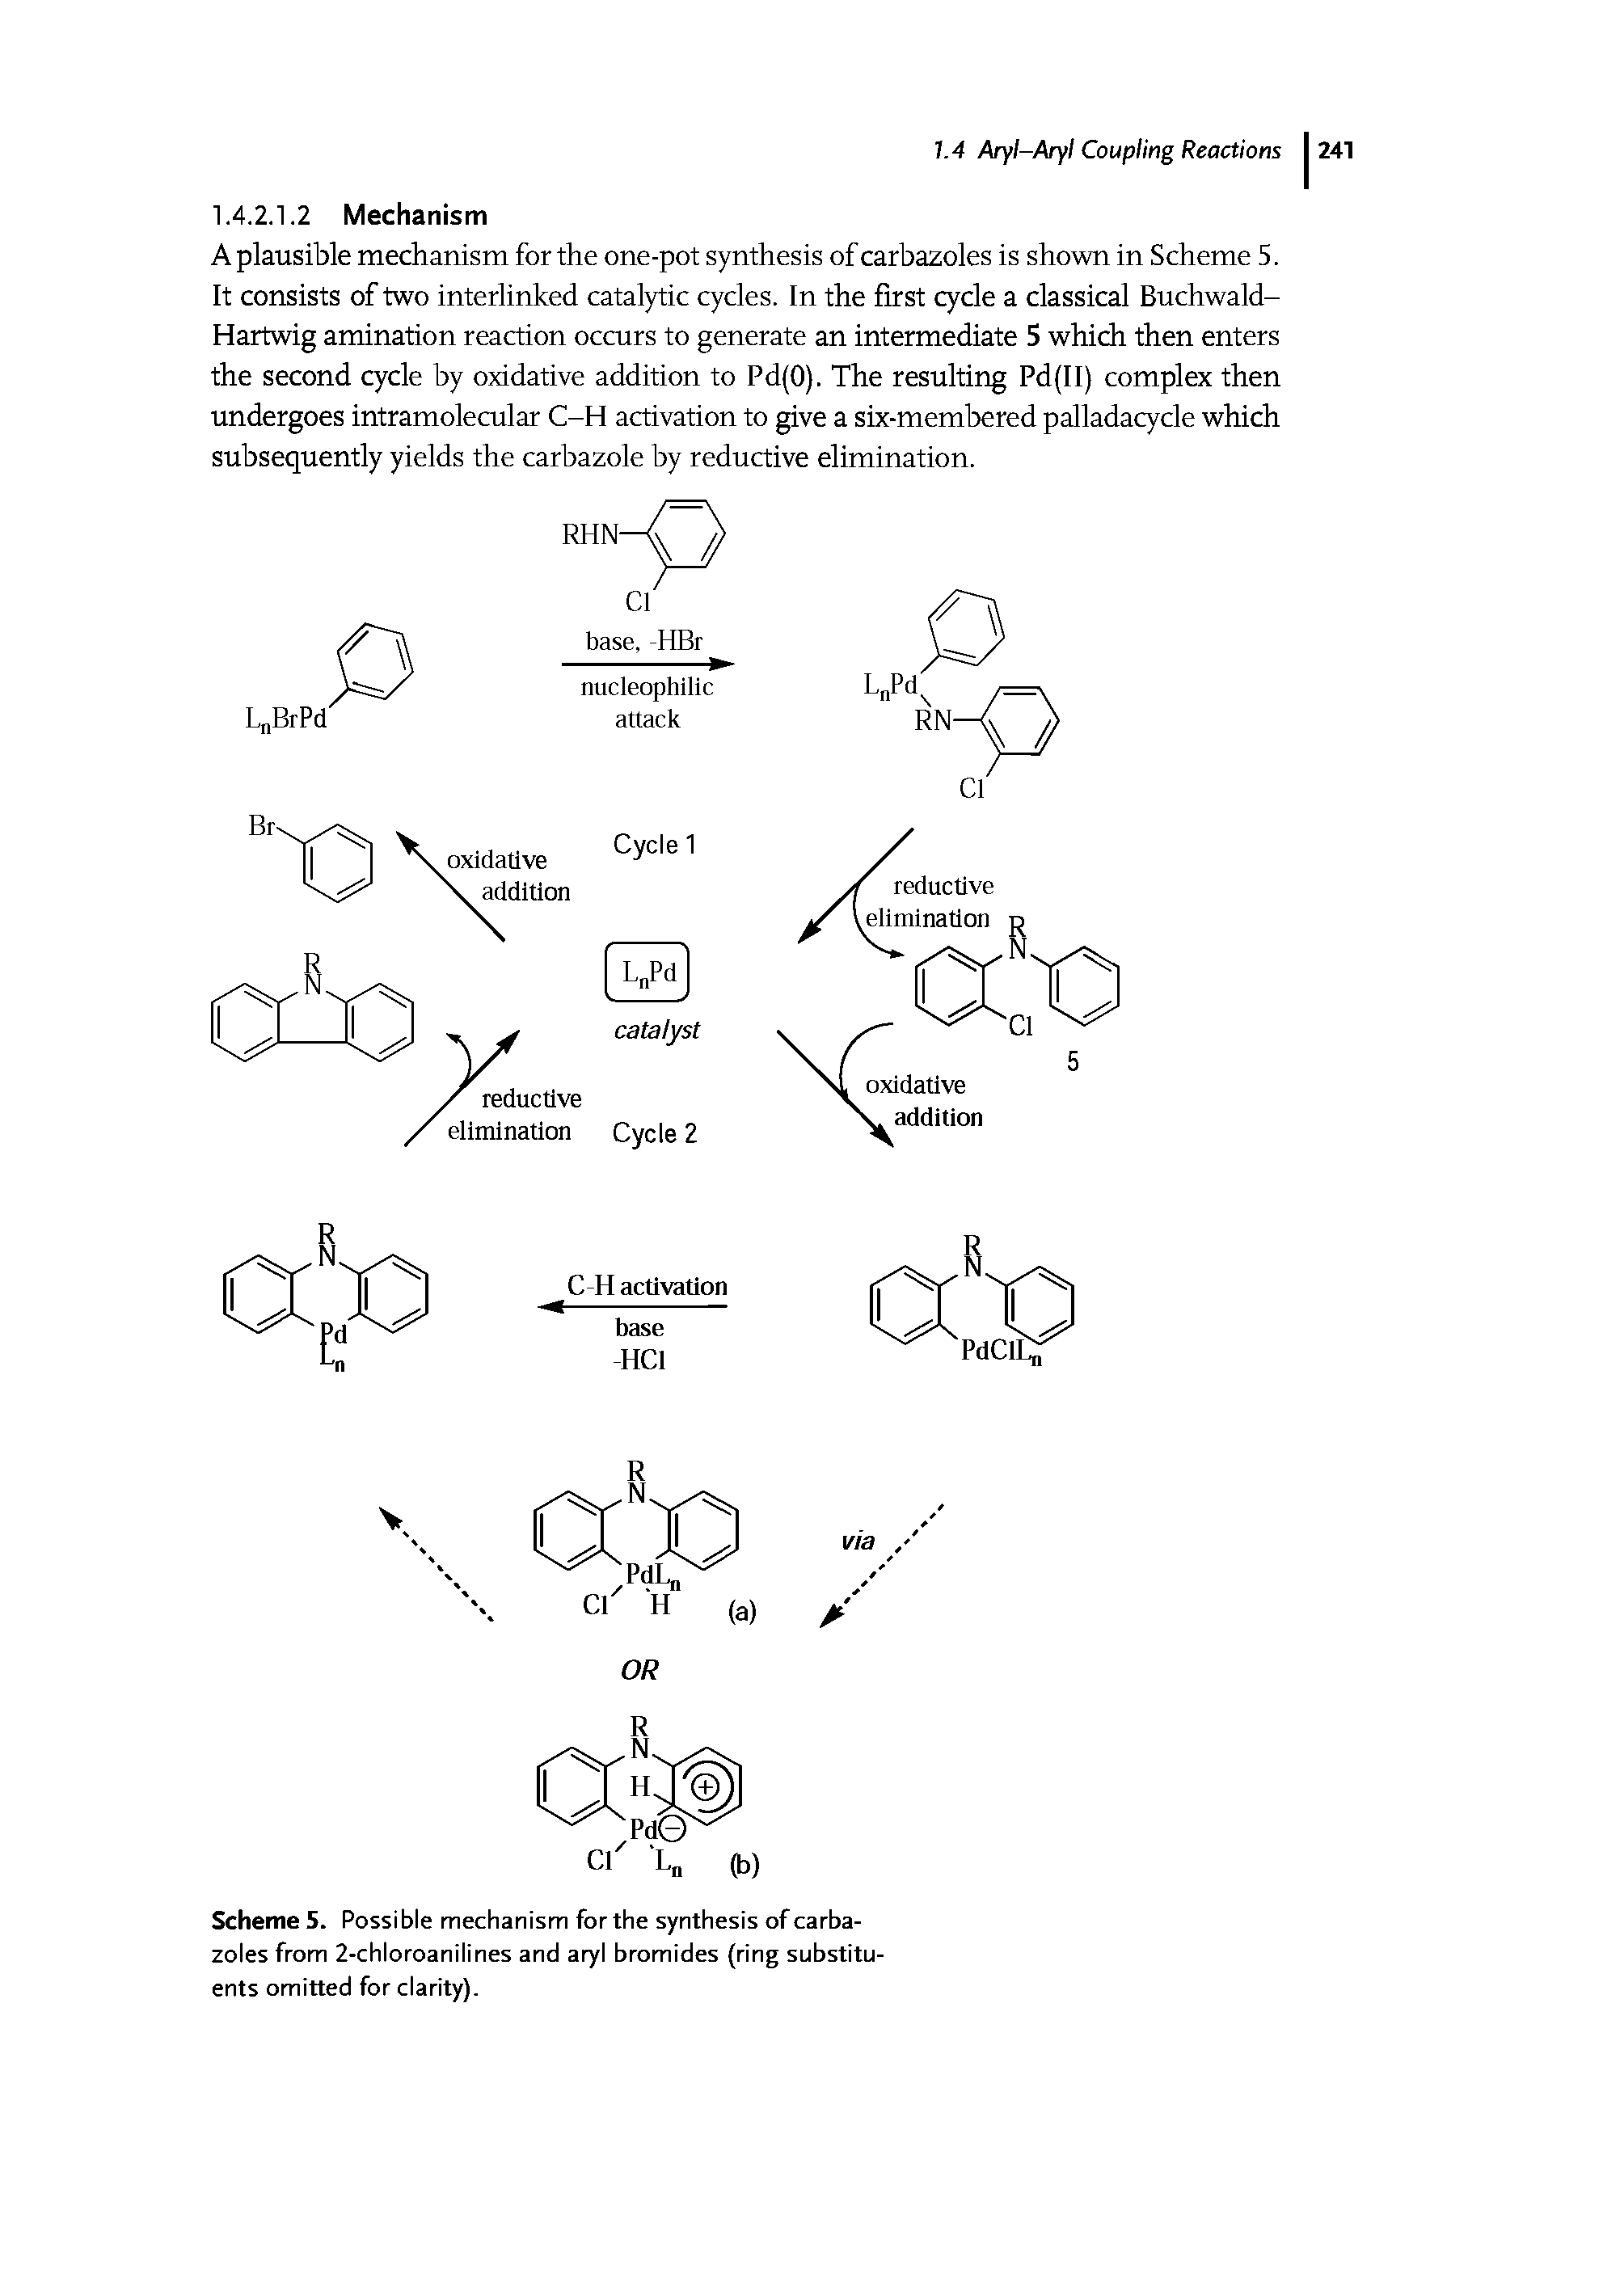 Scheme 5. Possible mechanism for the synthesis of carba-zoles from 2-chloroanilines and aryl bromides (ring substituents omitted for clarity).